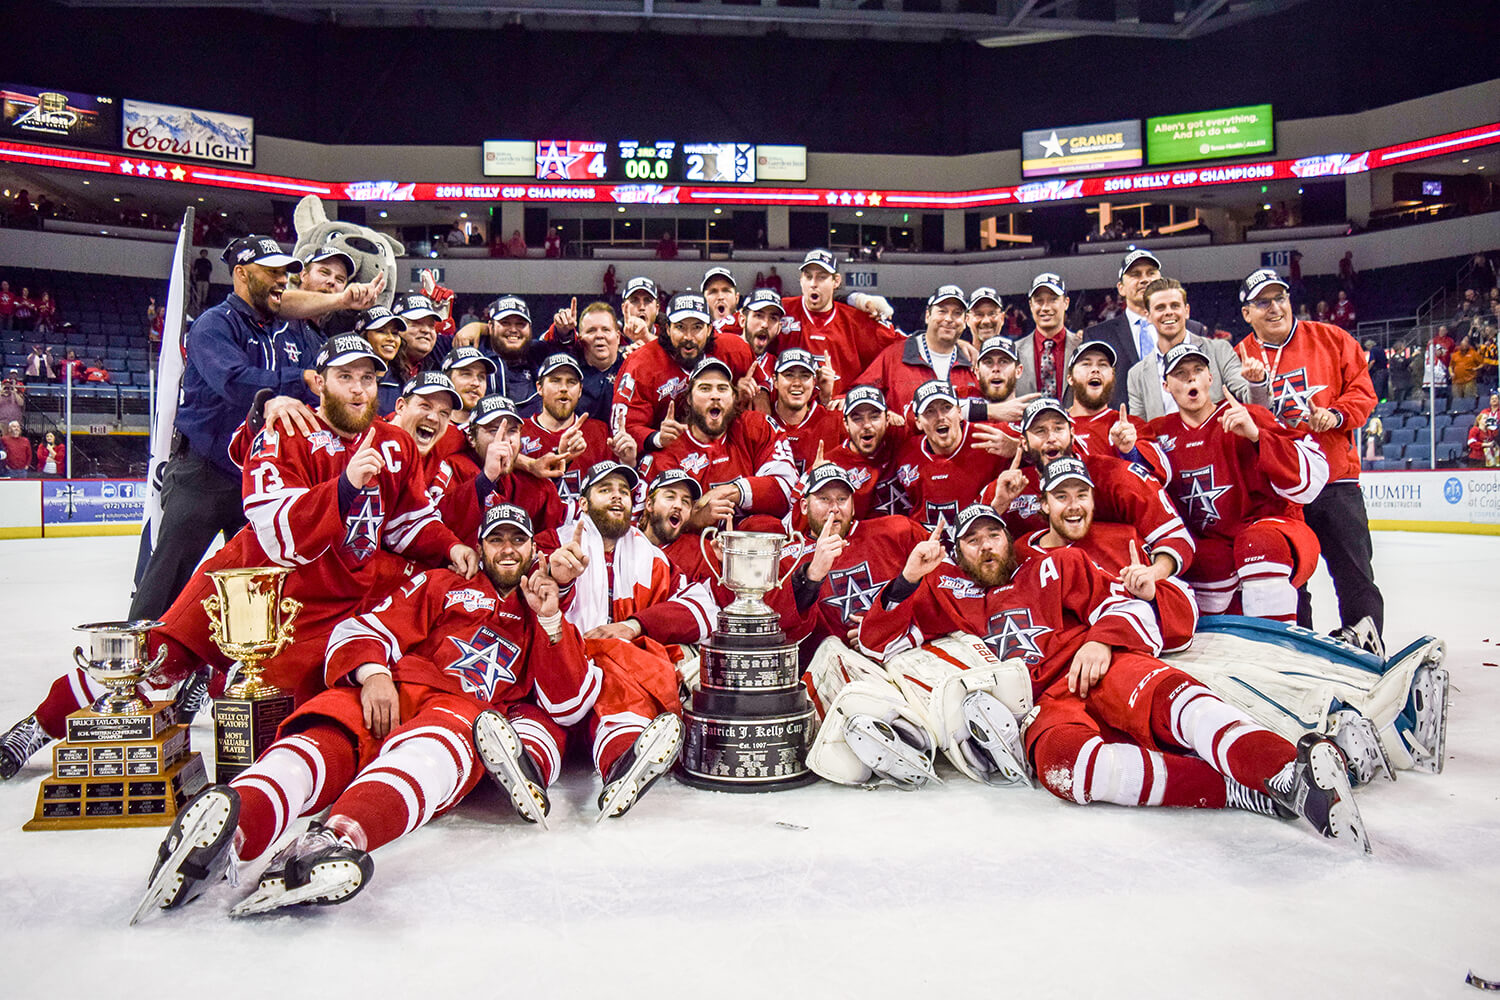 Allen Americans’ Fourth Straight Postseason Cup  Puts Them in the “Dynasty” Zone